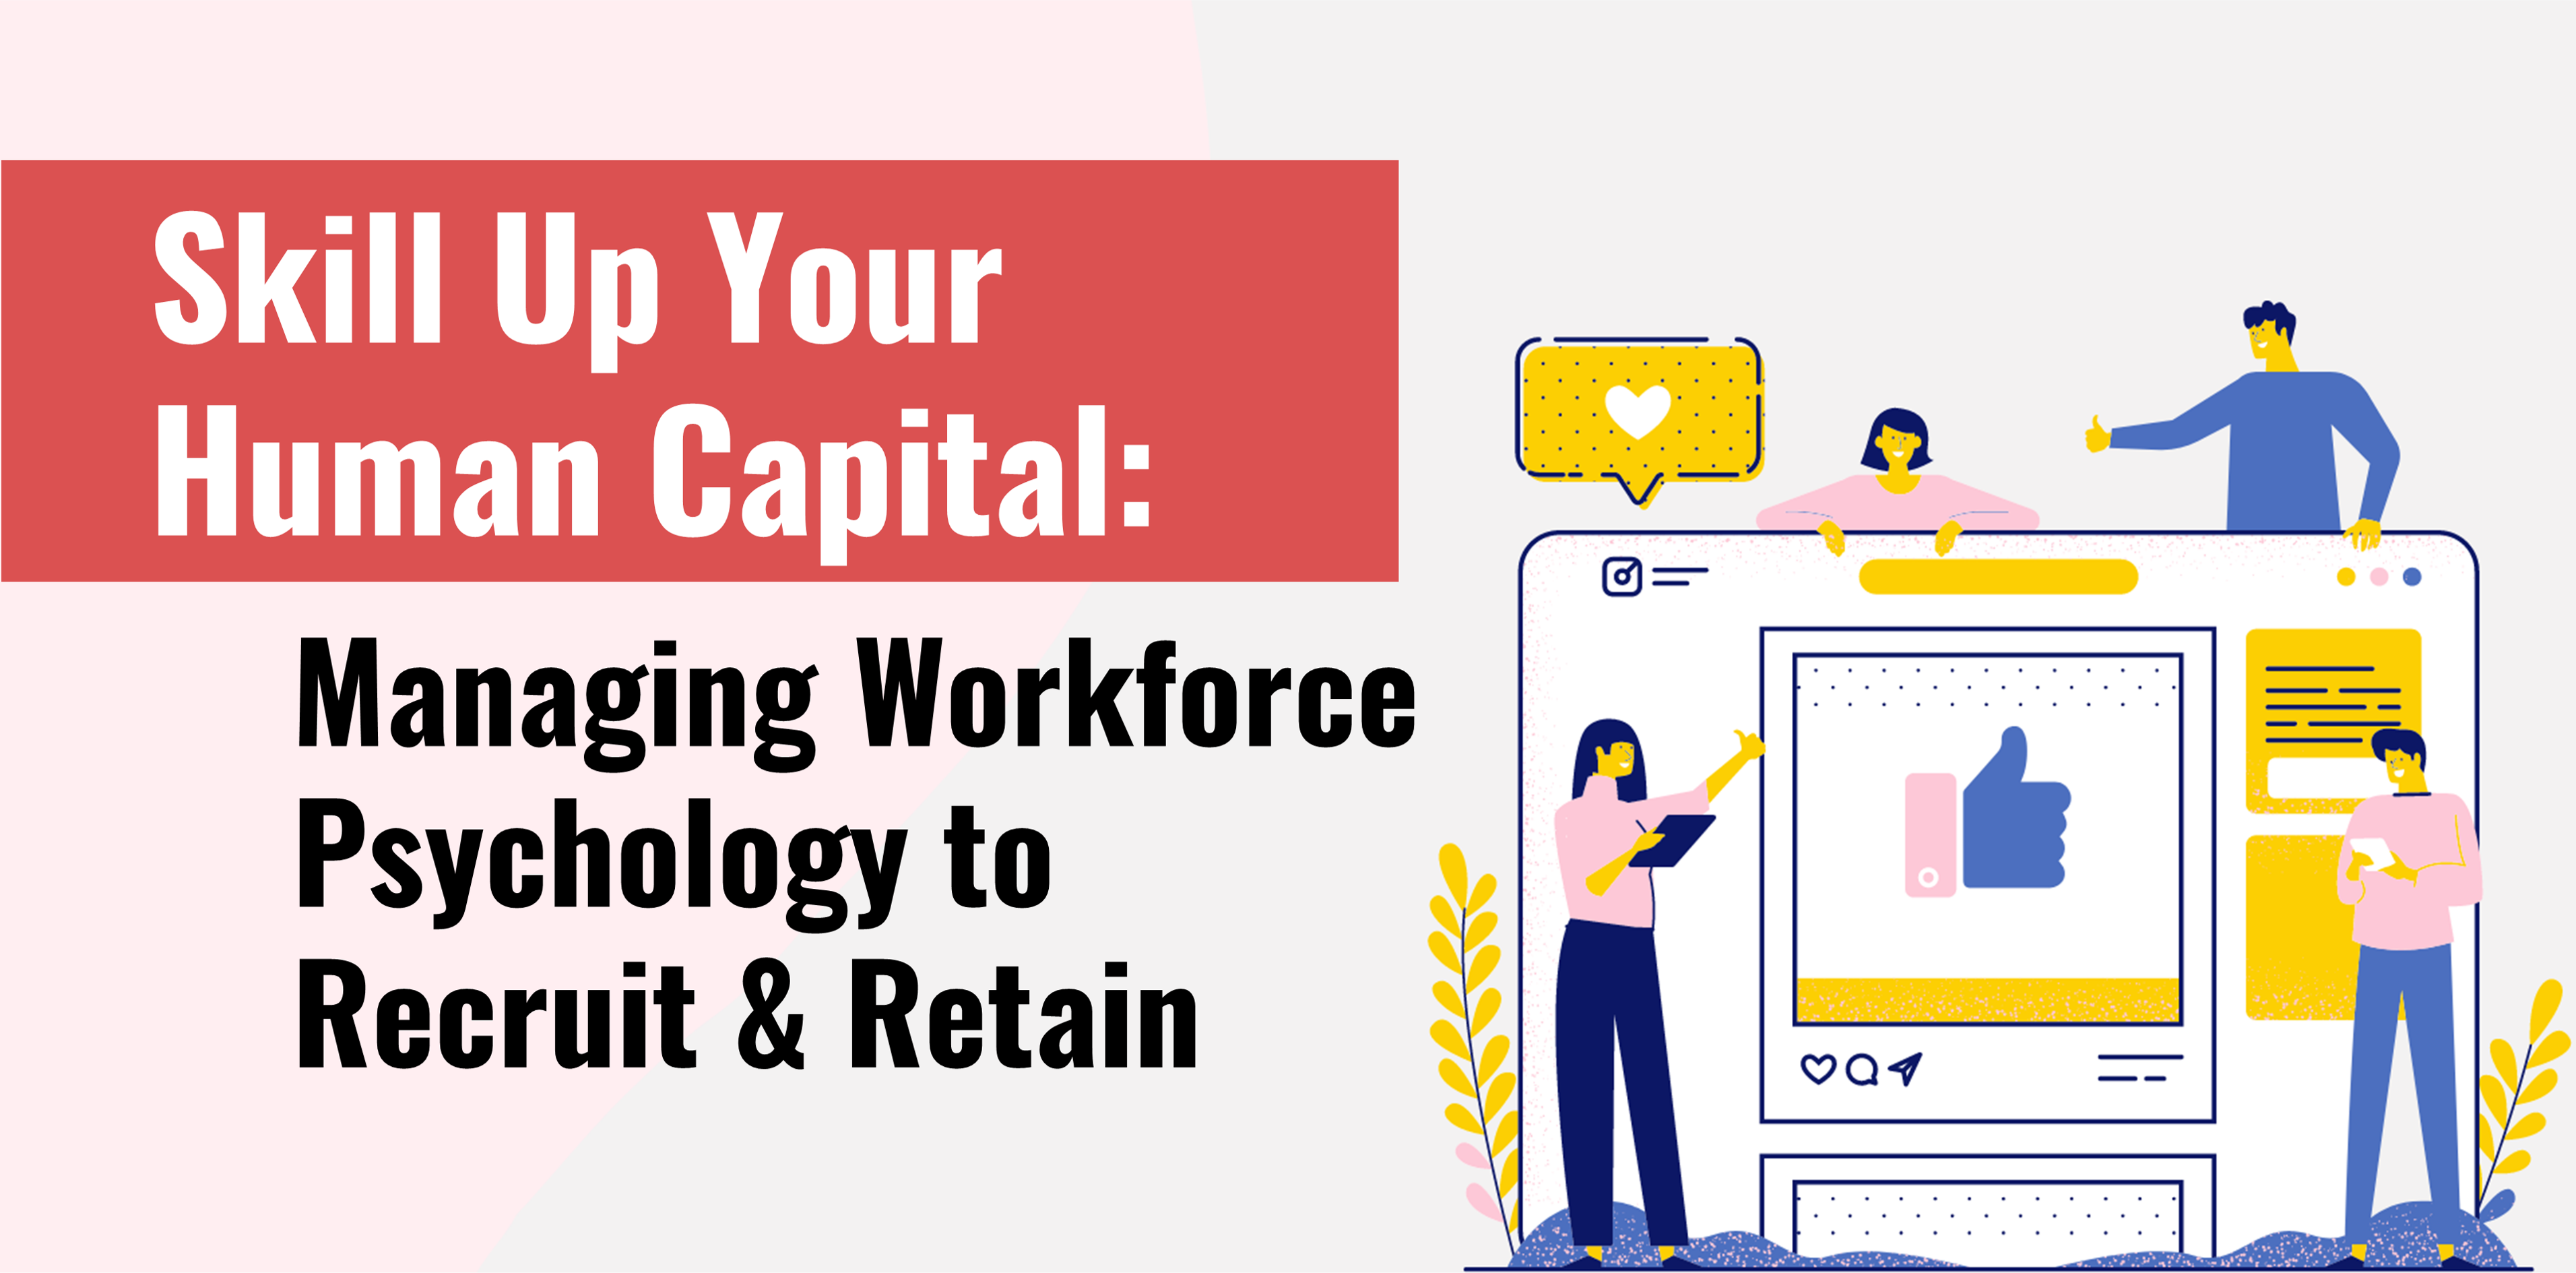 Skill Up Your Human Capital: Managing Workforce Psychology to Recruit & Retain